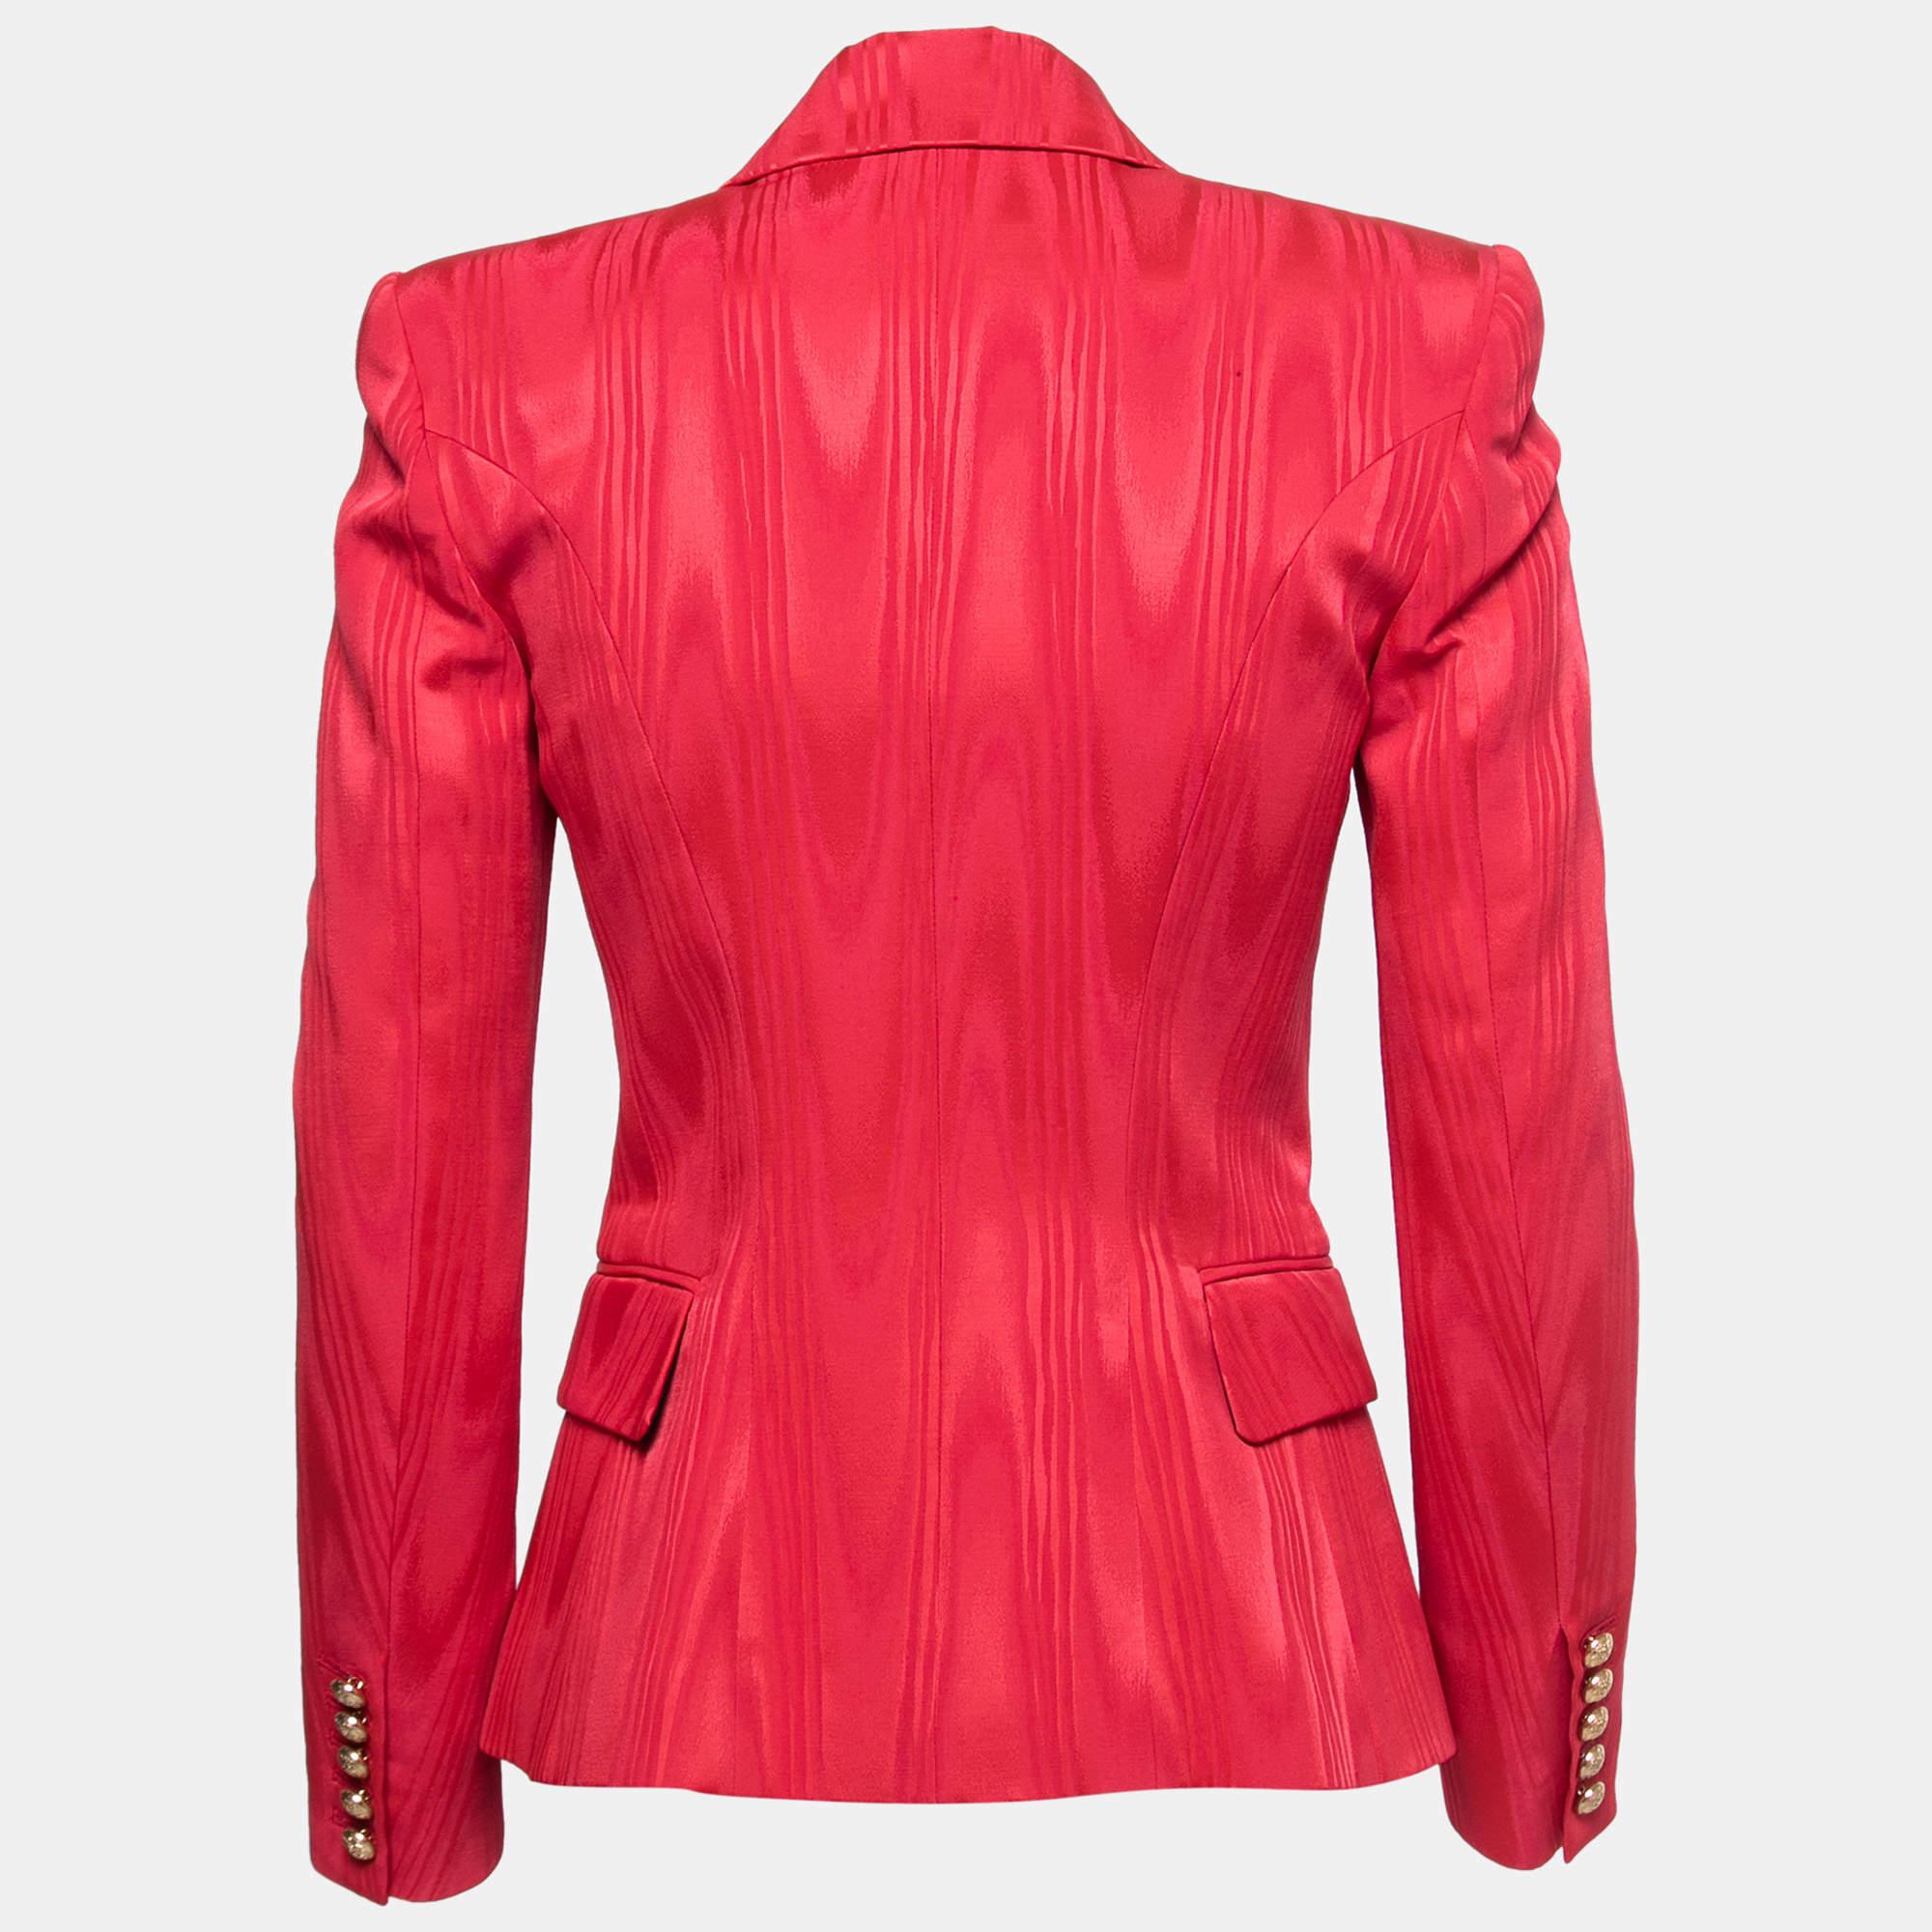 Balmain's flawless tailoring is unmatchable, and this blazer exemplifies that. The creation comes in a pink hue and is adorned with gold-tone buttons. The structured shoulders of the iconic Balmain blazers make them so covetable, and the fitted